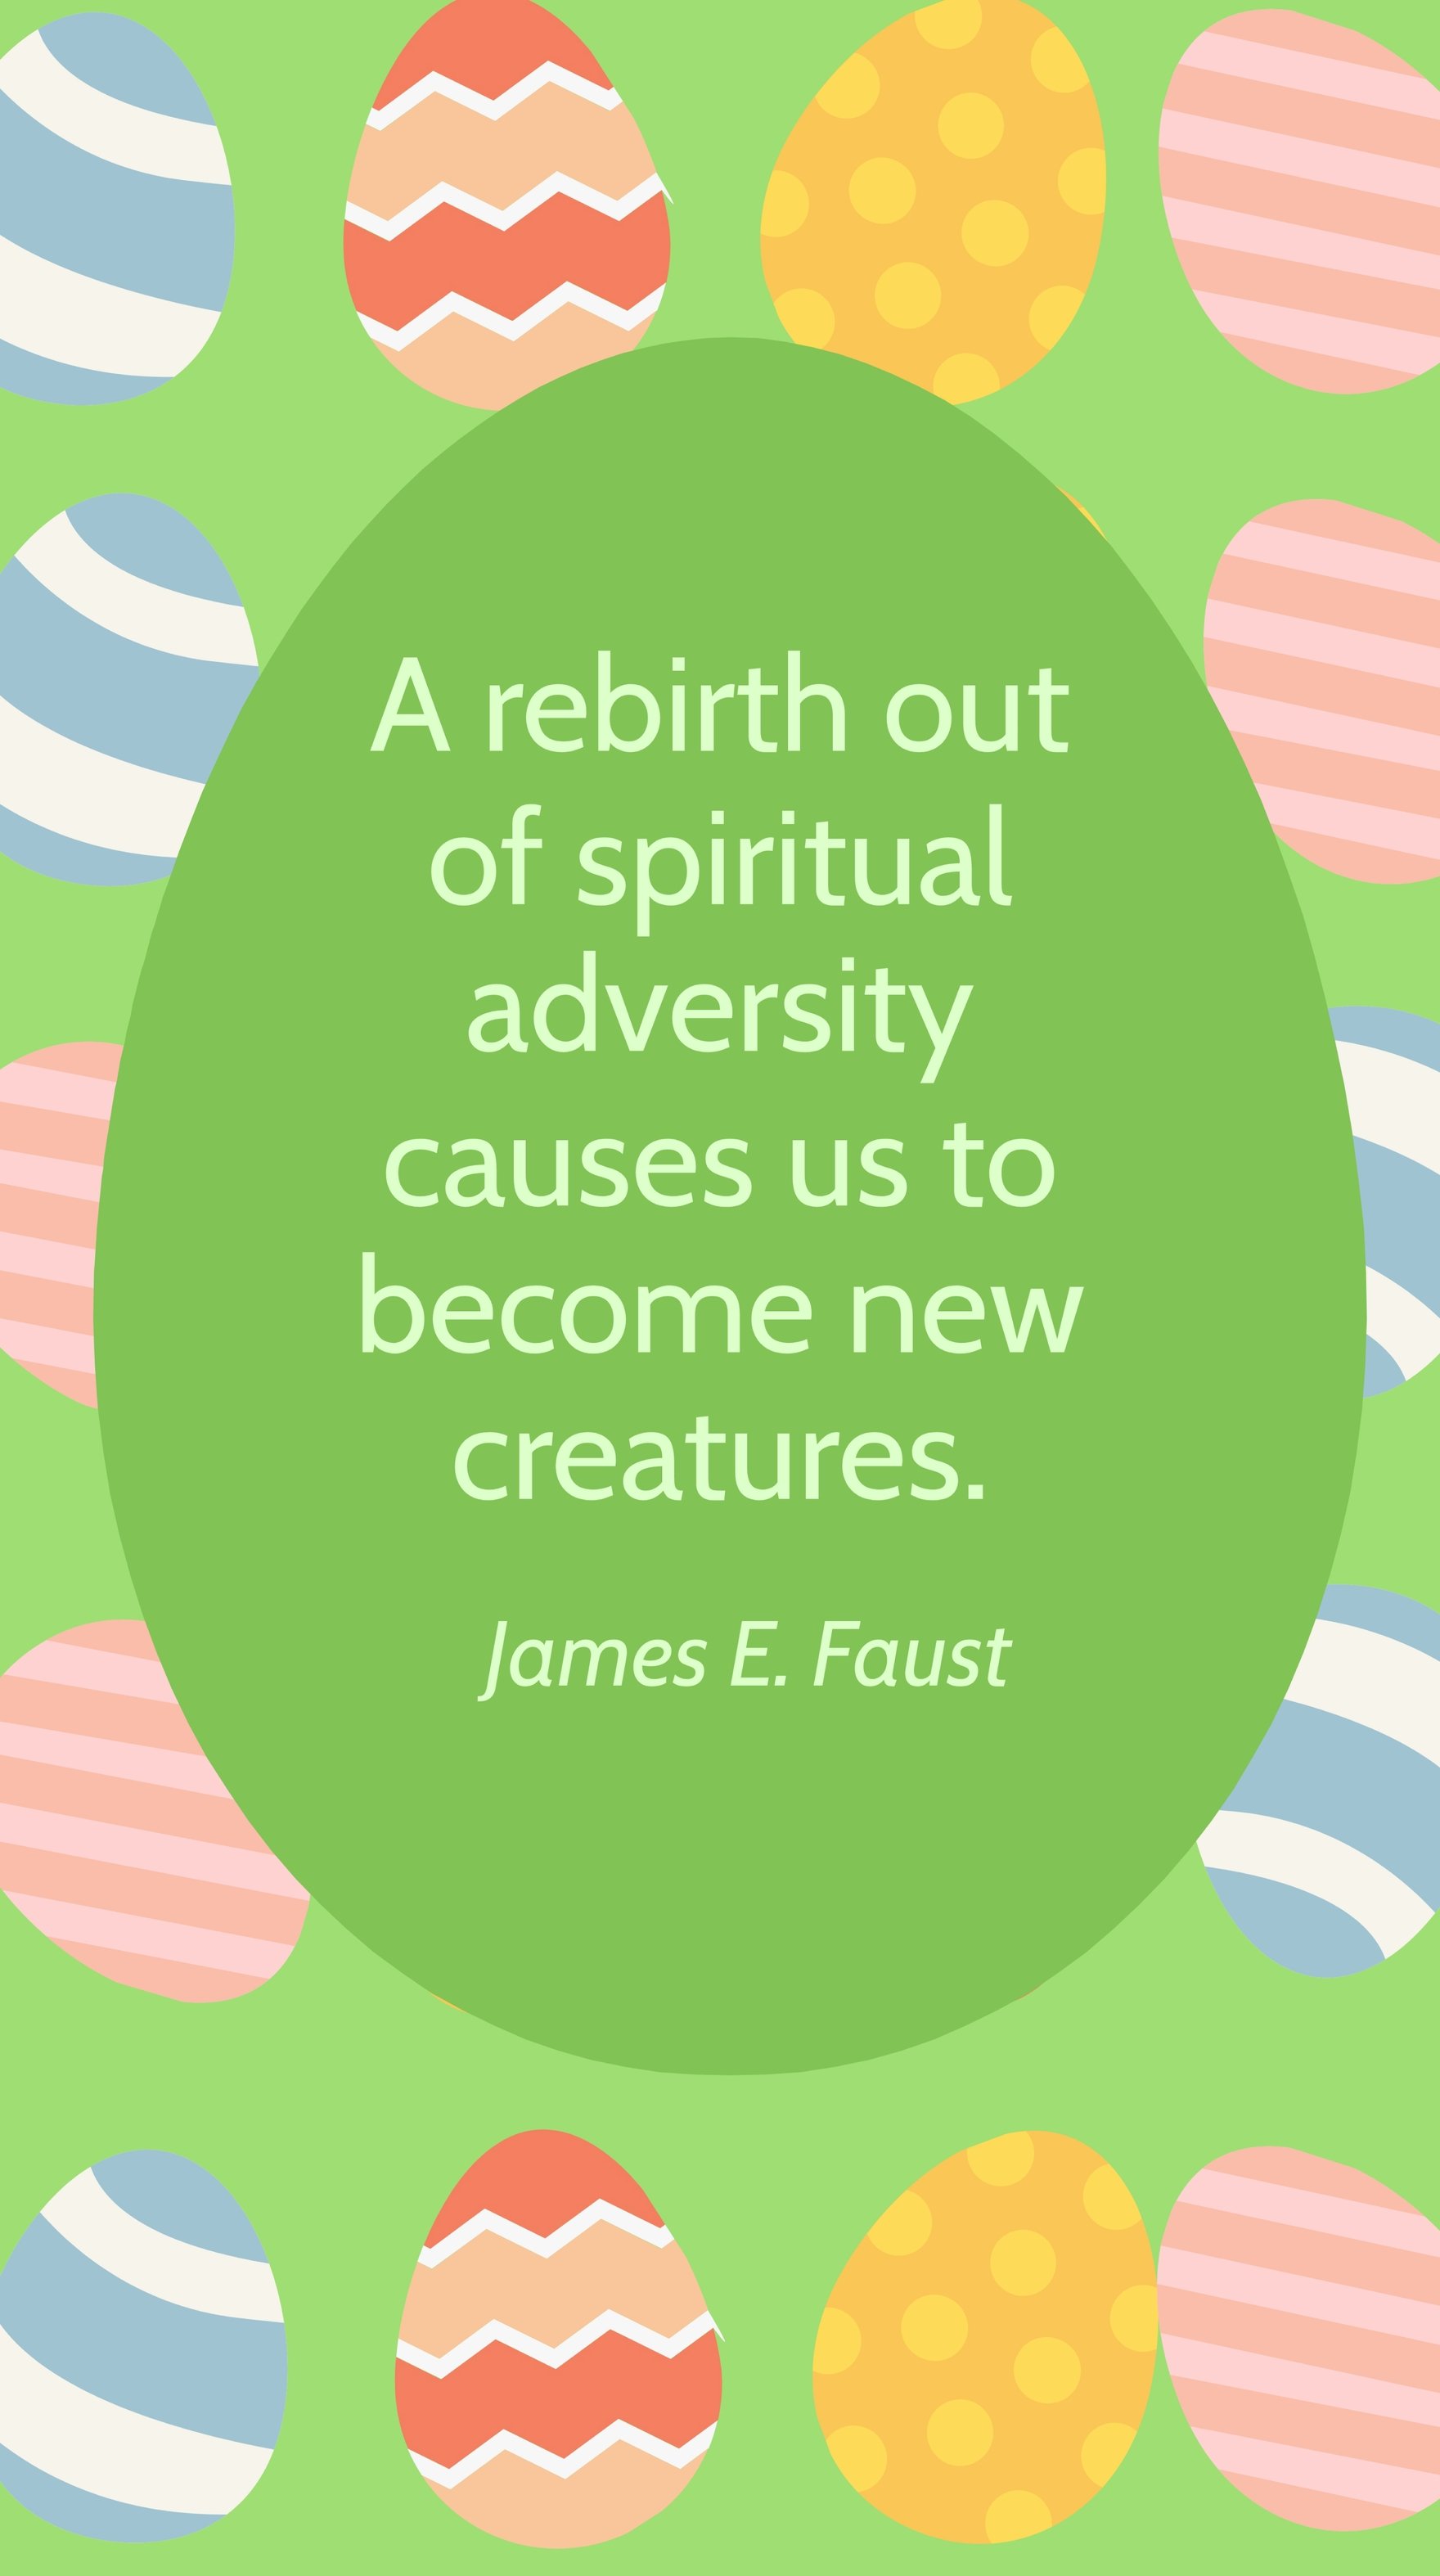 James E. Faust - A rebirth out of spiritual adversity causes us to become new creatures.